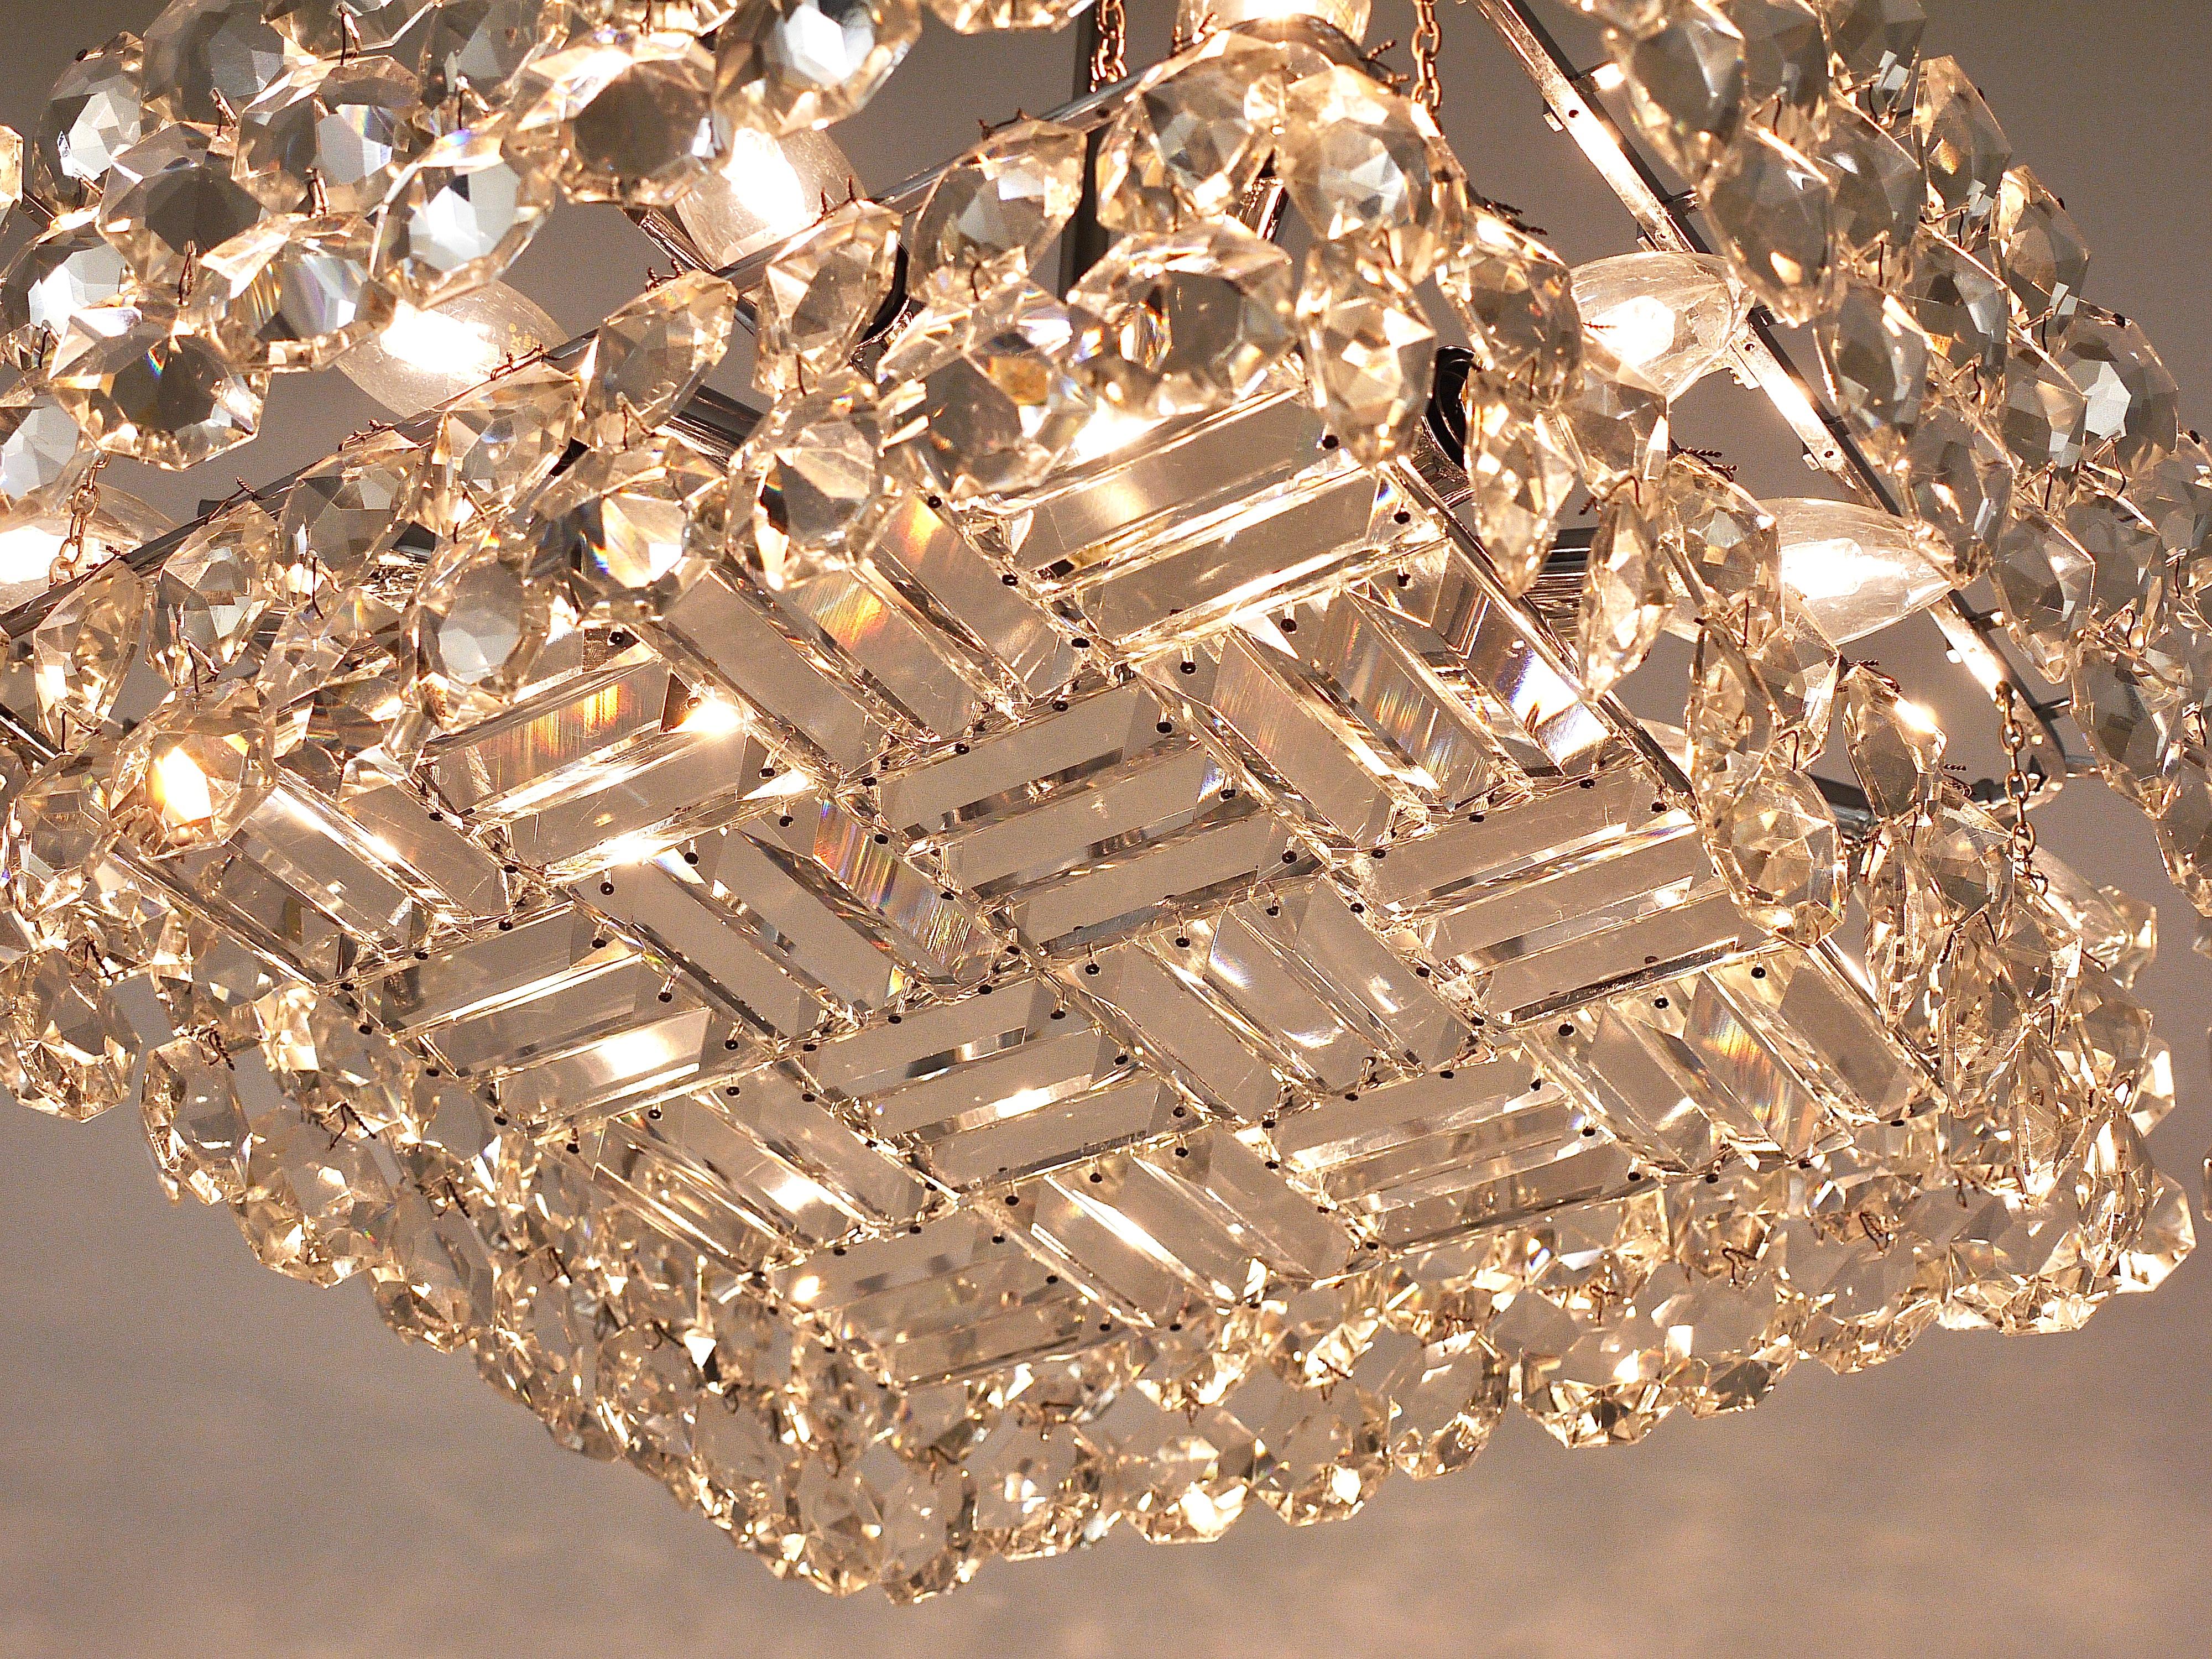 Large Square Bakalowits Chandelier with Diamond-Shaped Crystals, Austria, 1950s For Sale 10